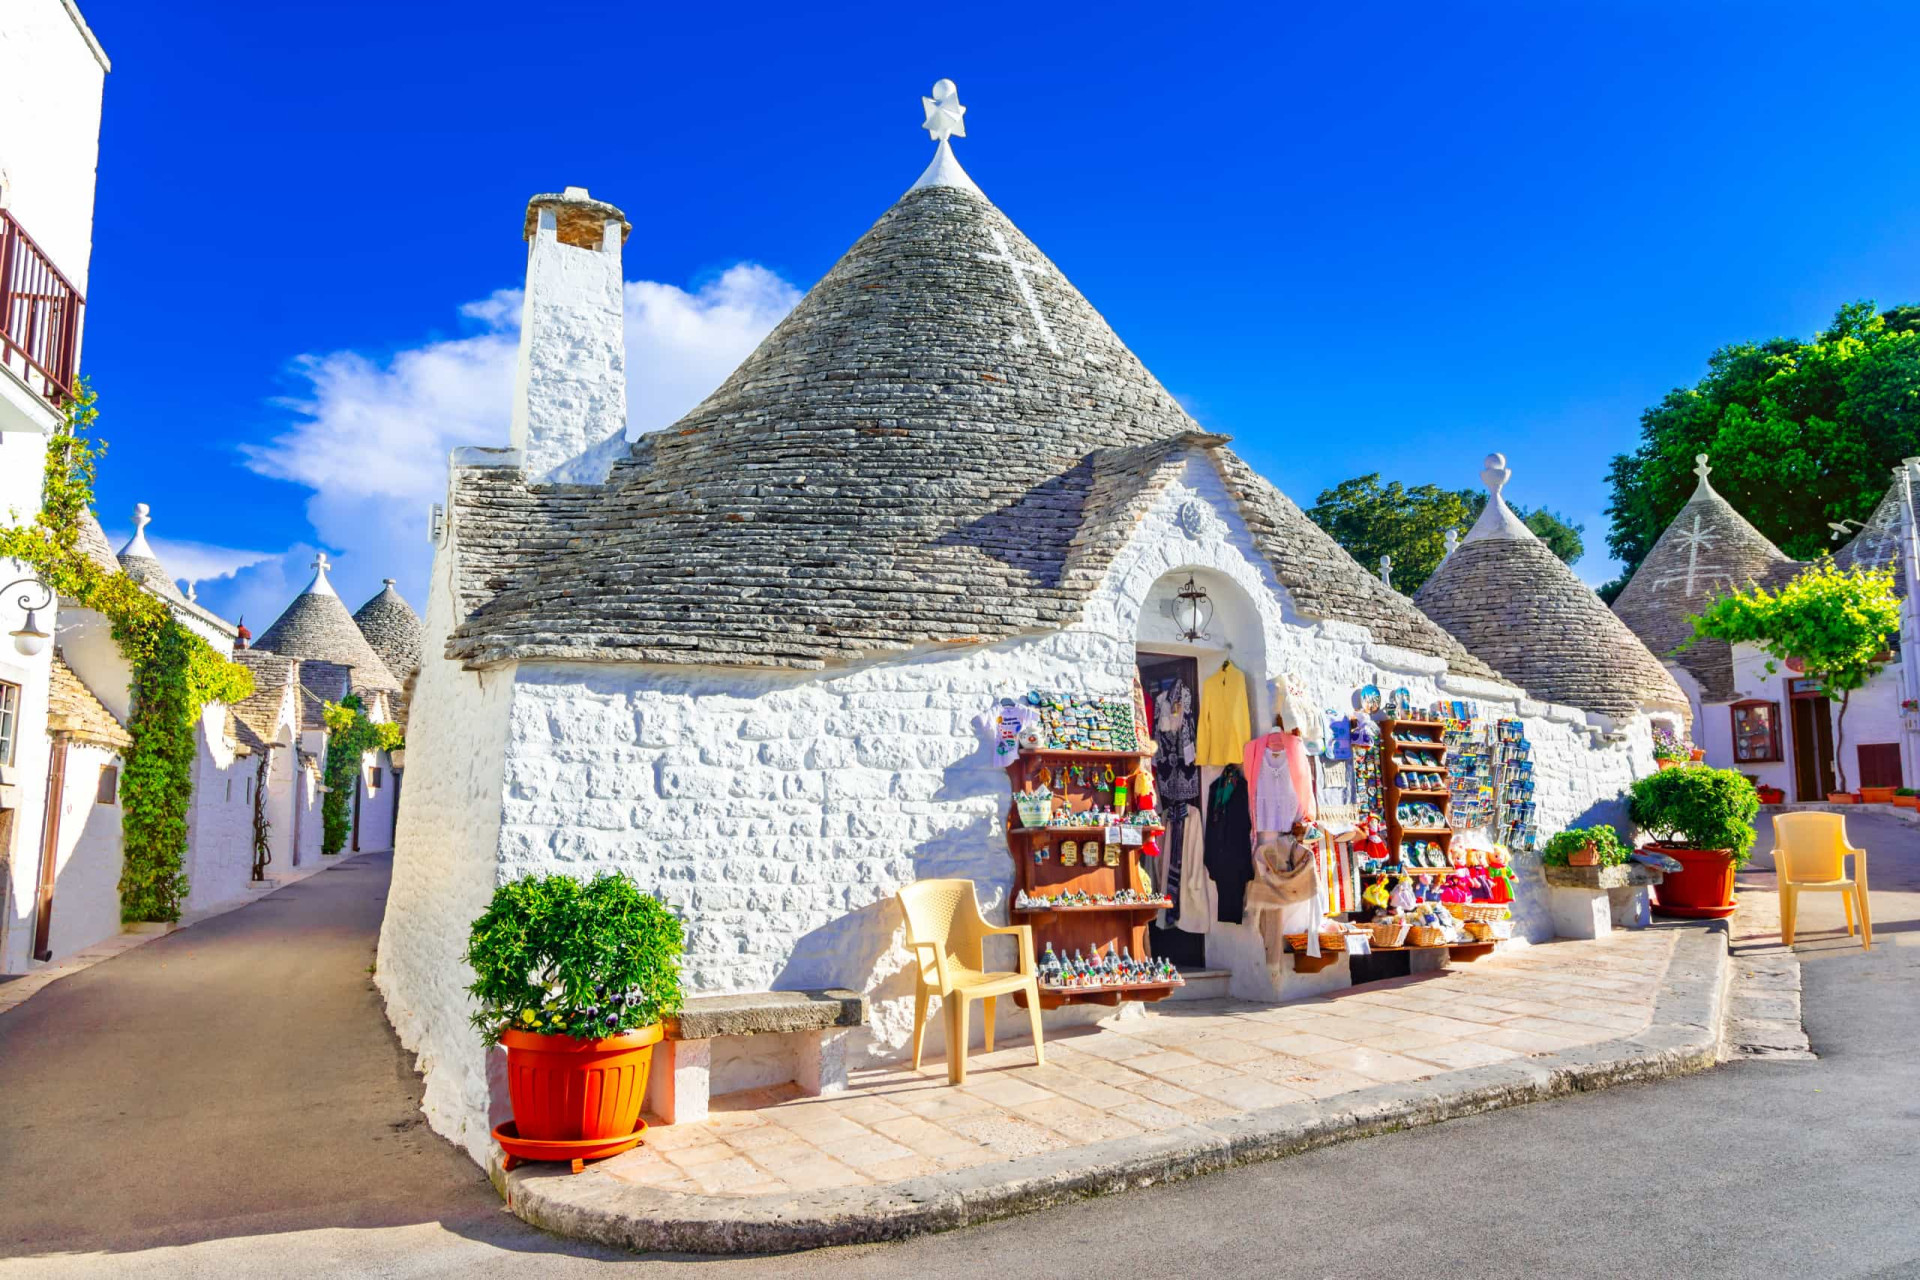 <p>The quaint village of Alberobella is famous for its collection of curious conical-roofed whitewashed structures, clustered in pockets like huge wild fungi and known as <em>trulli.</em></p><p>You may also like:<a href="https://www.starsinsider.com/n/344330?utm_source=msn.com&utm_medium=display&utm_campaign=referral_description&utm_content=481361v4en-en_selected"> The loneliest things in the universe</a></p>